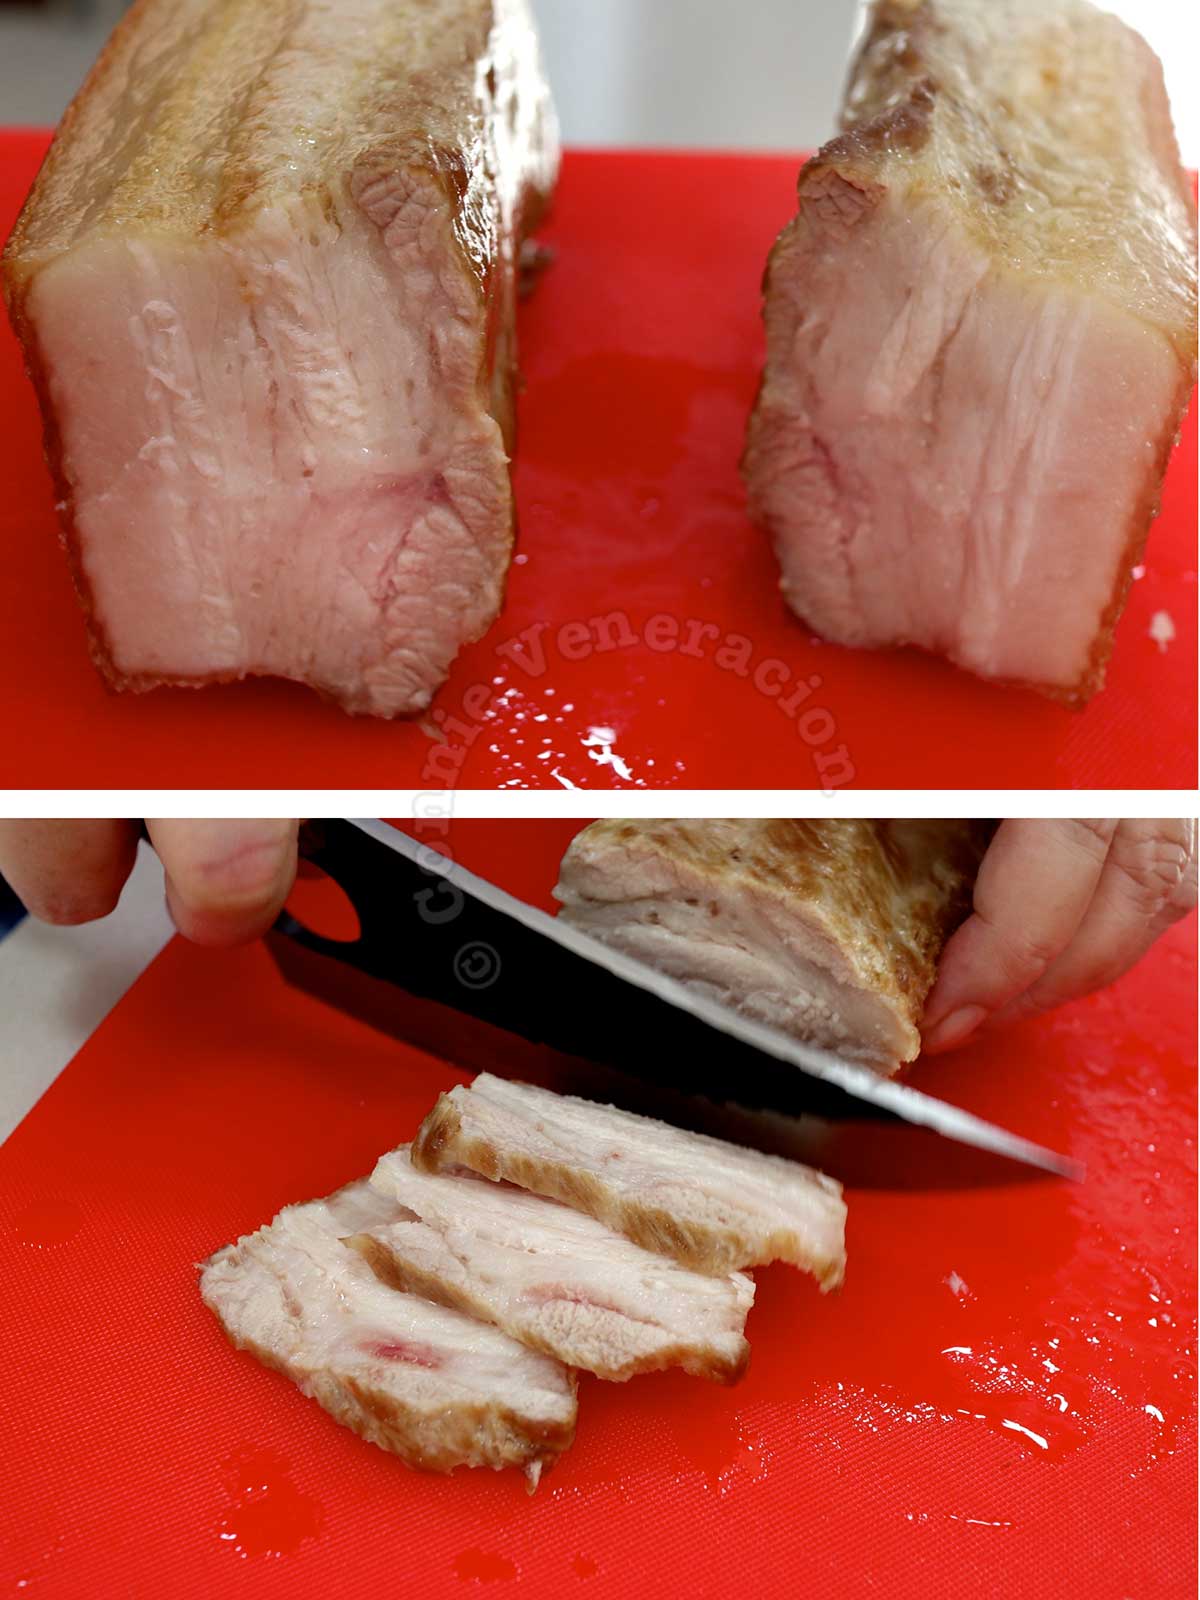 Slicing partially cooked pork belly